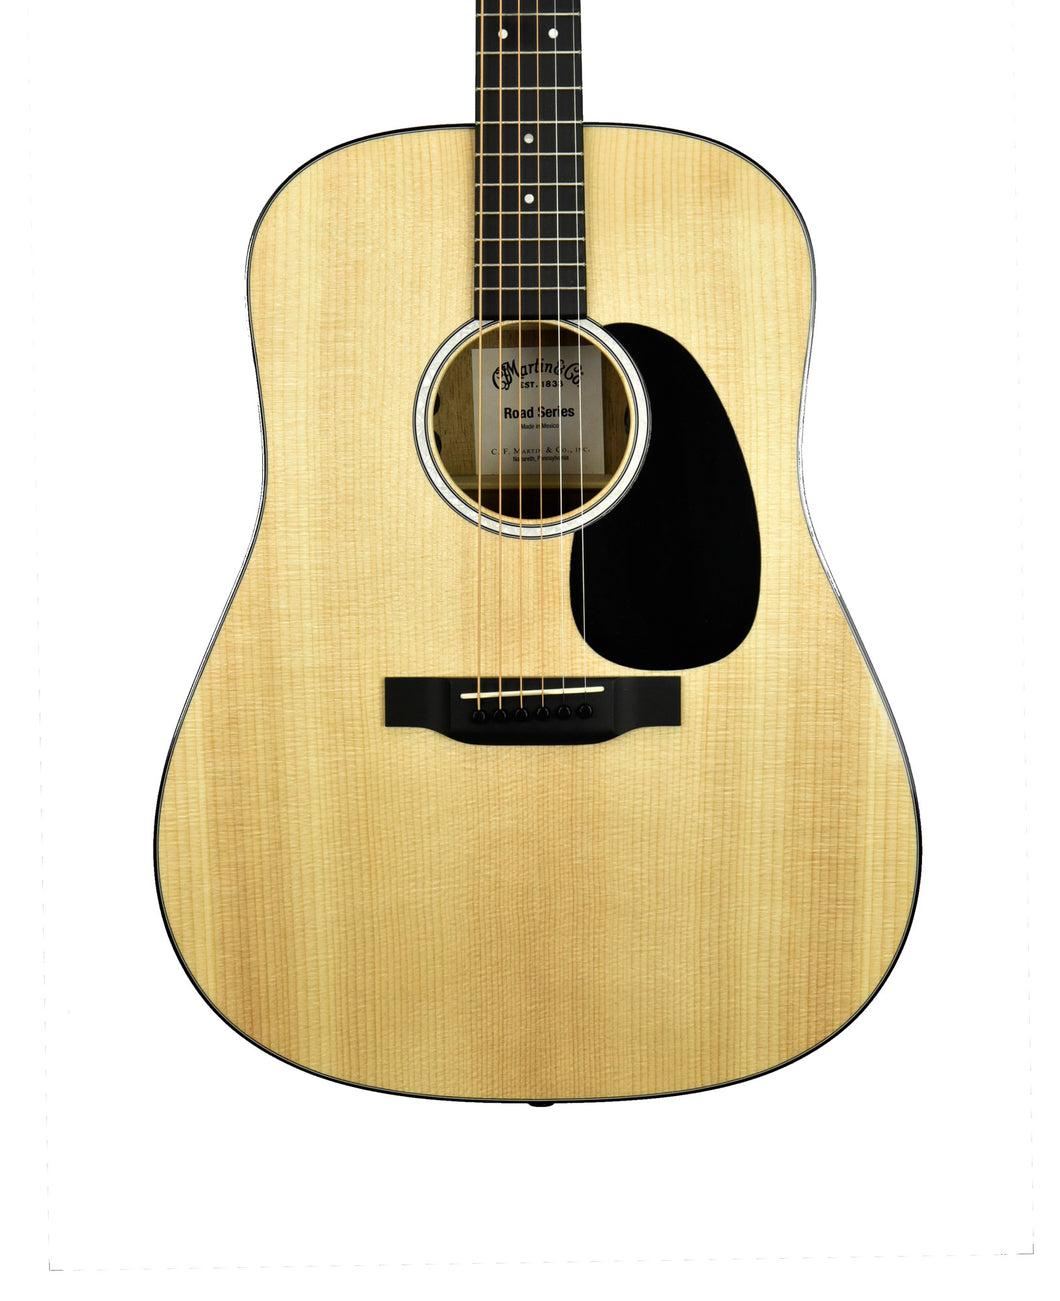 Martin D-12E Road Series Acoustic-Electric Guitar in Natural 2712521 - The Music Gallery